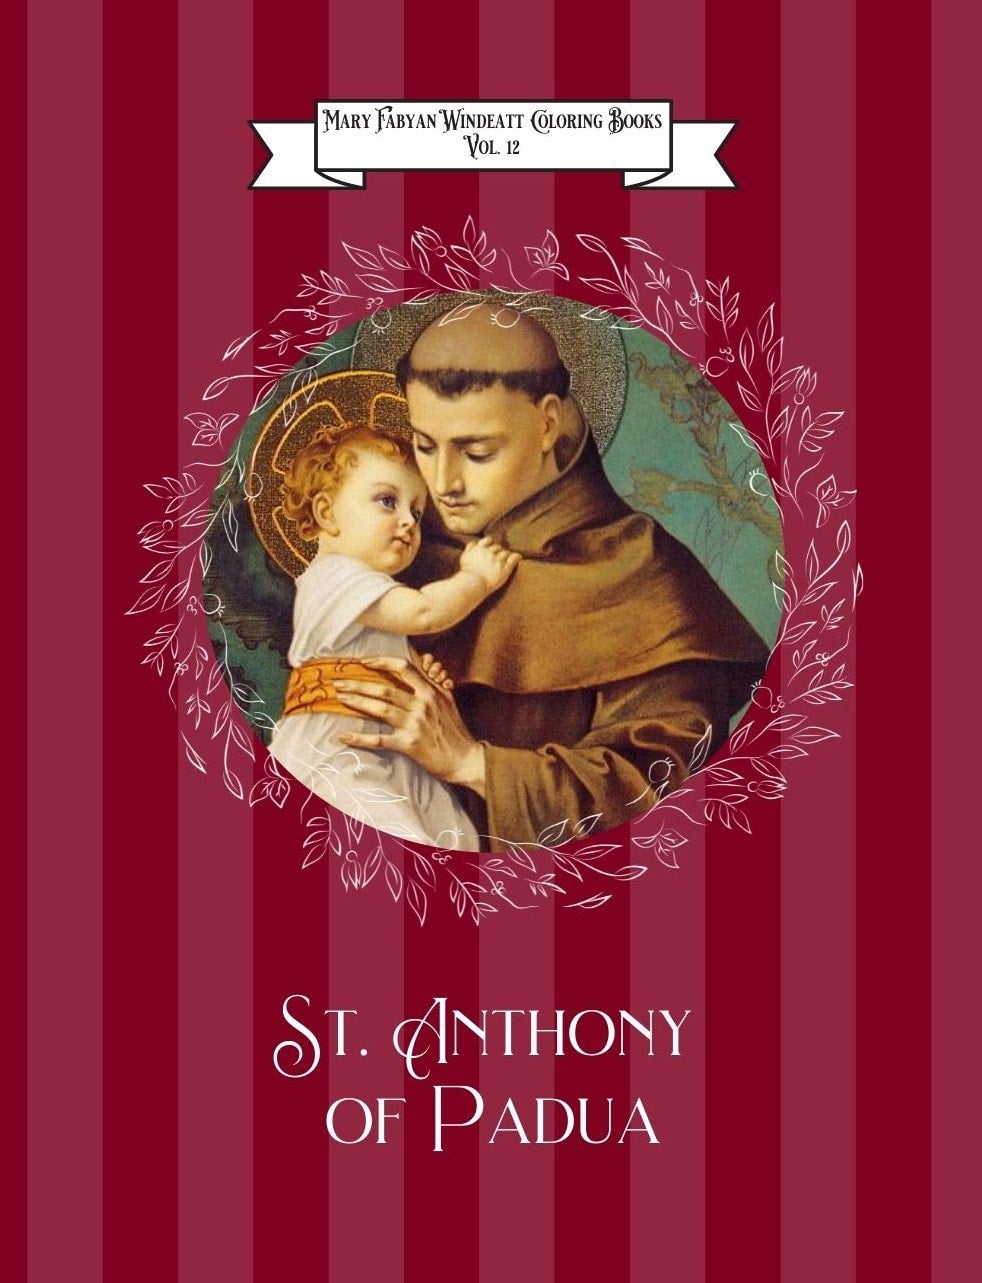 St anthony of padua coloring book windeatt v st jerome school and library